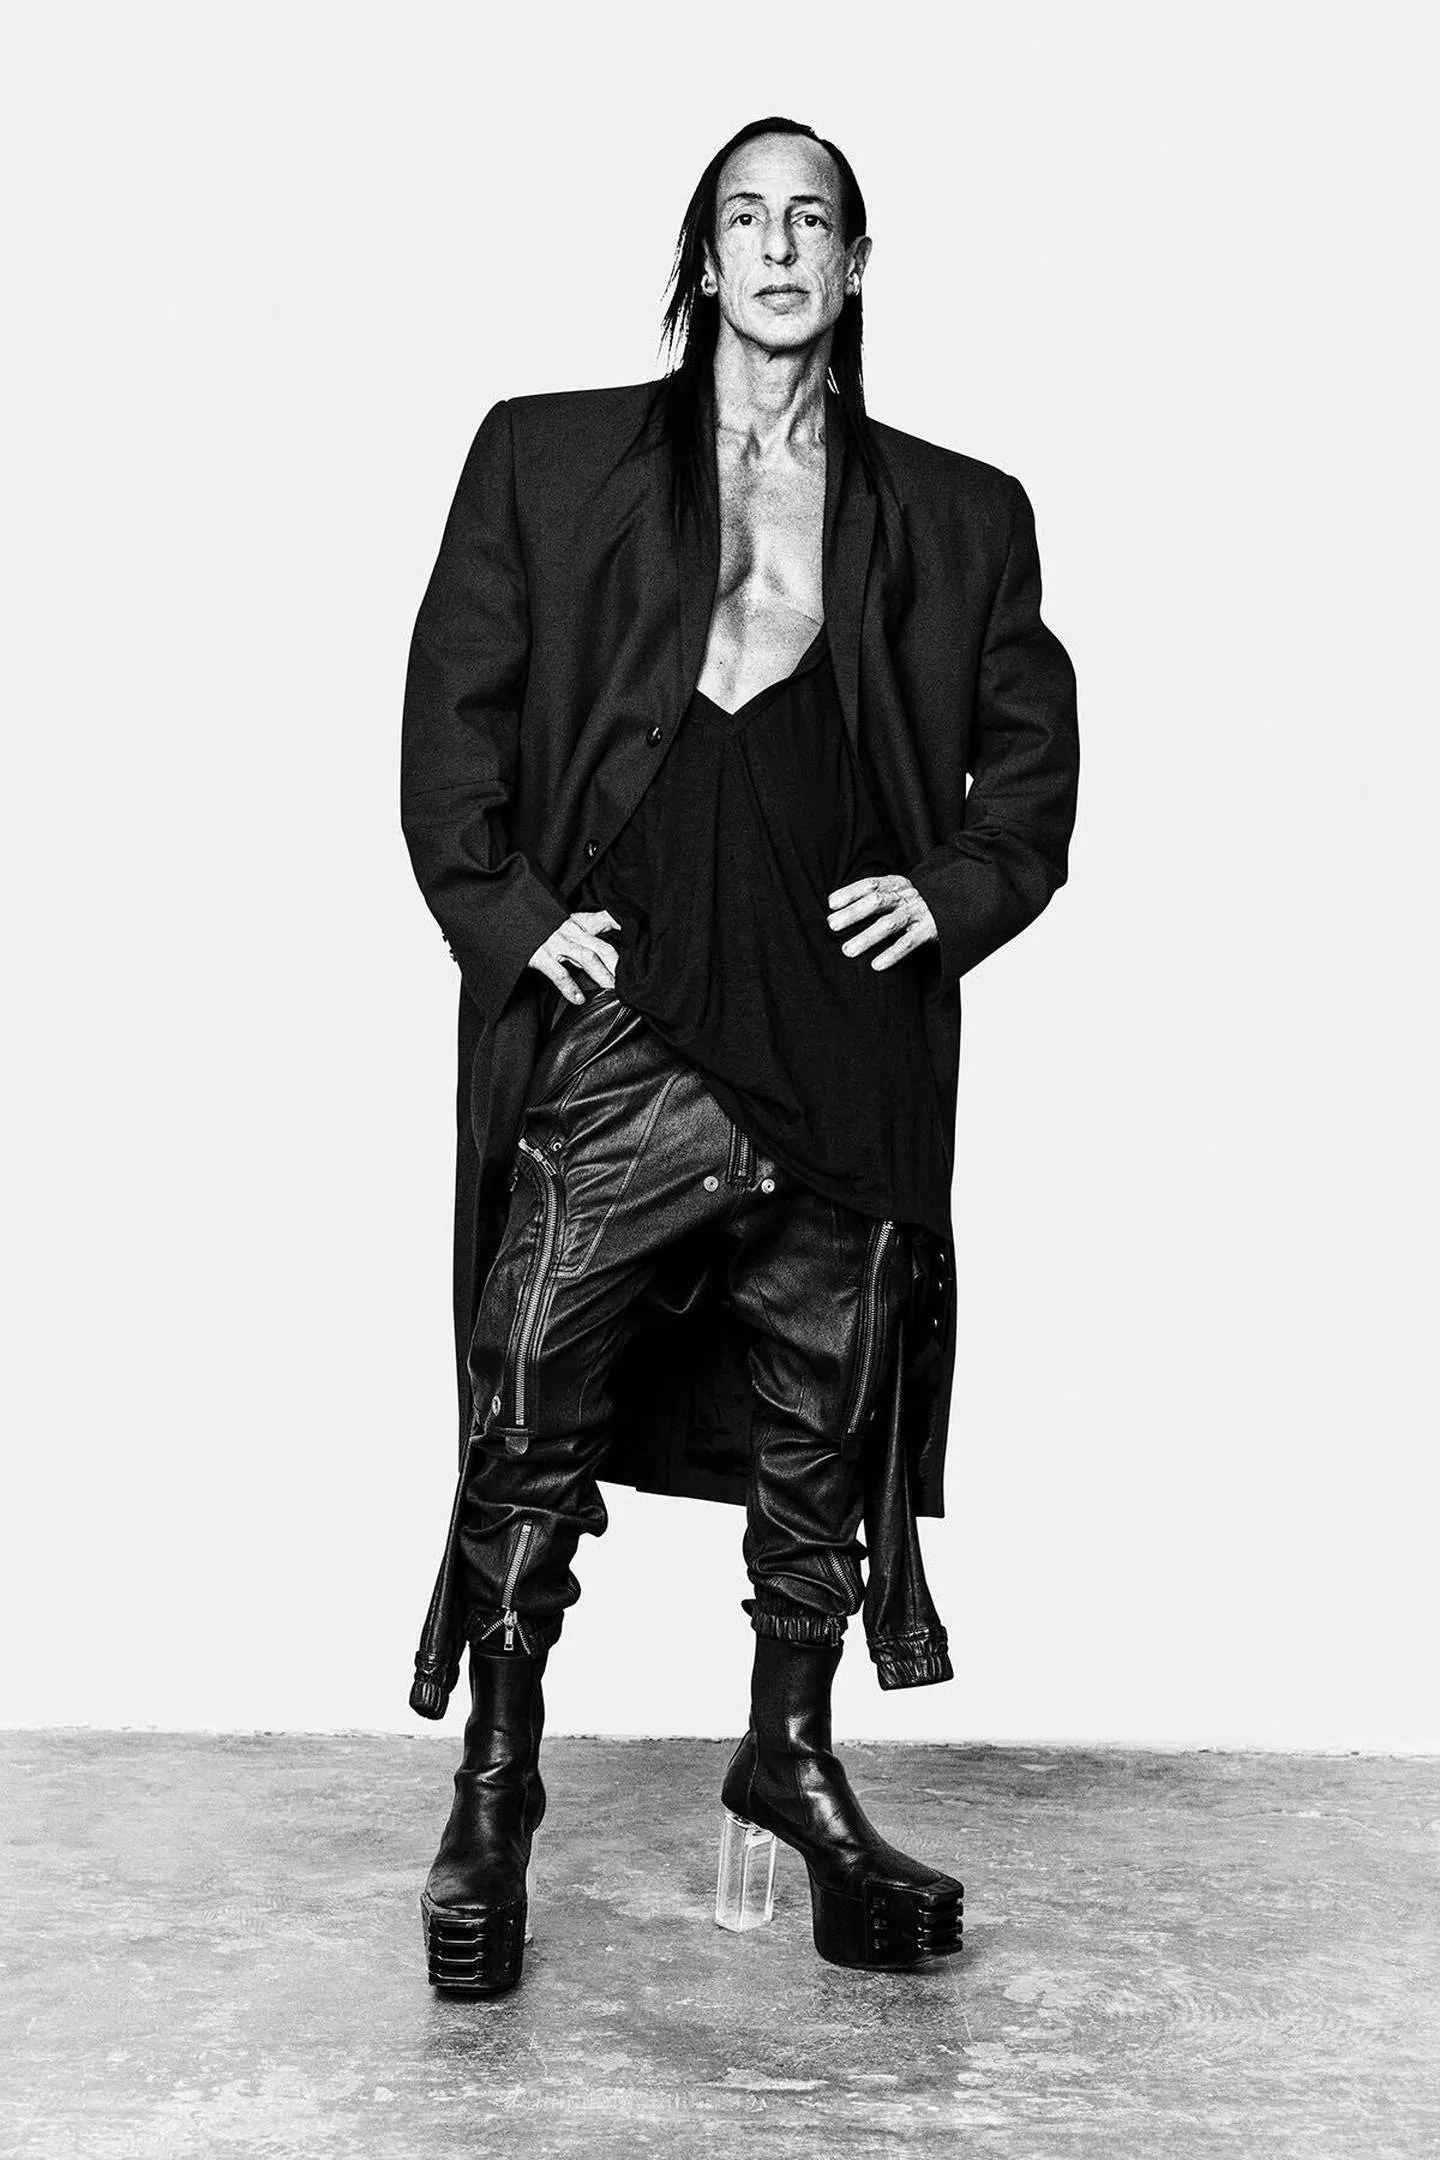 Hellfire and Humility How the Pandemic Changed Rick Owens BoF